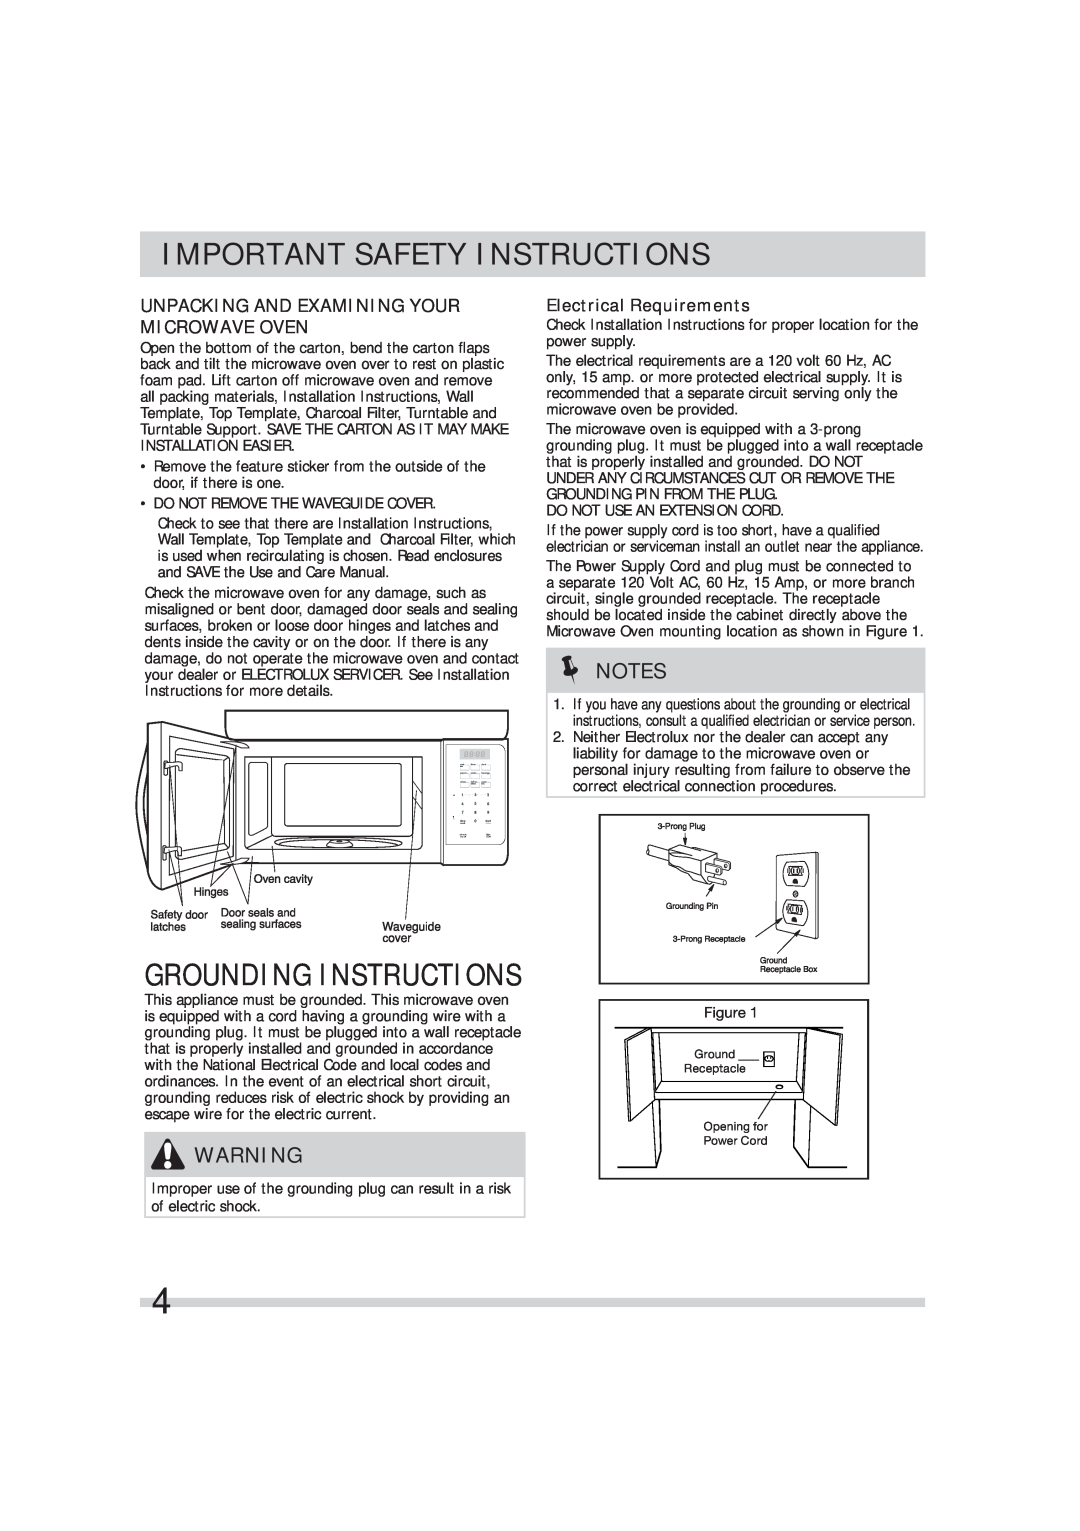 Frigidaire FFMV162LM Grounding Instructions, Unpacking And Examining Your Microwave Oven, Important Safety Instructions 